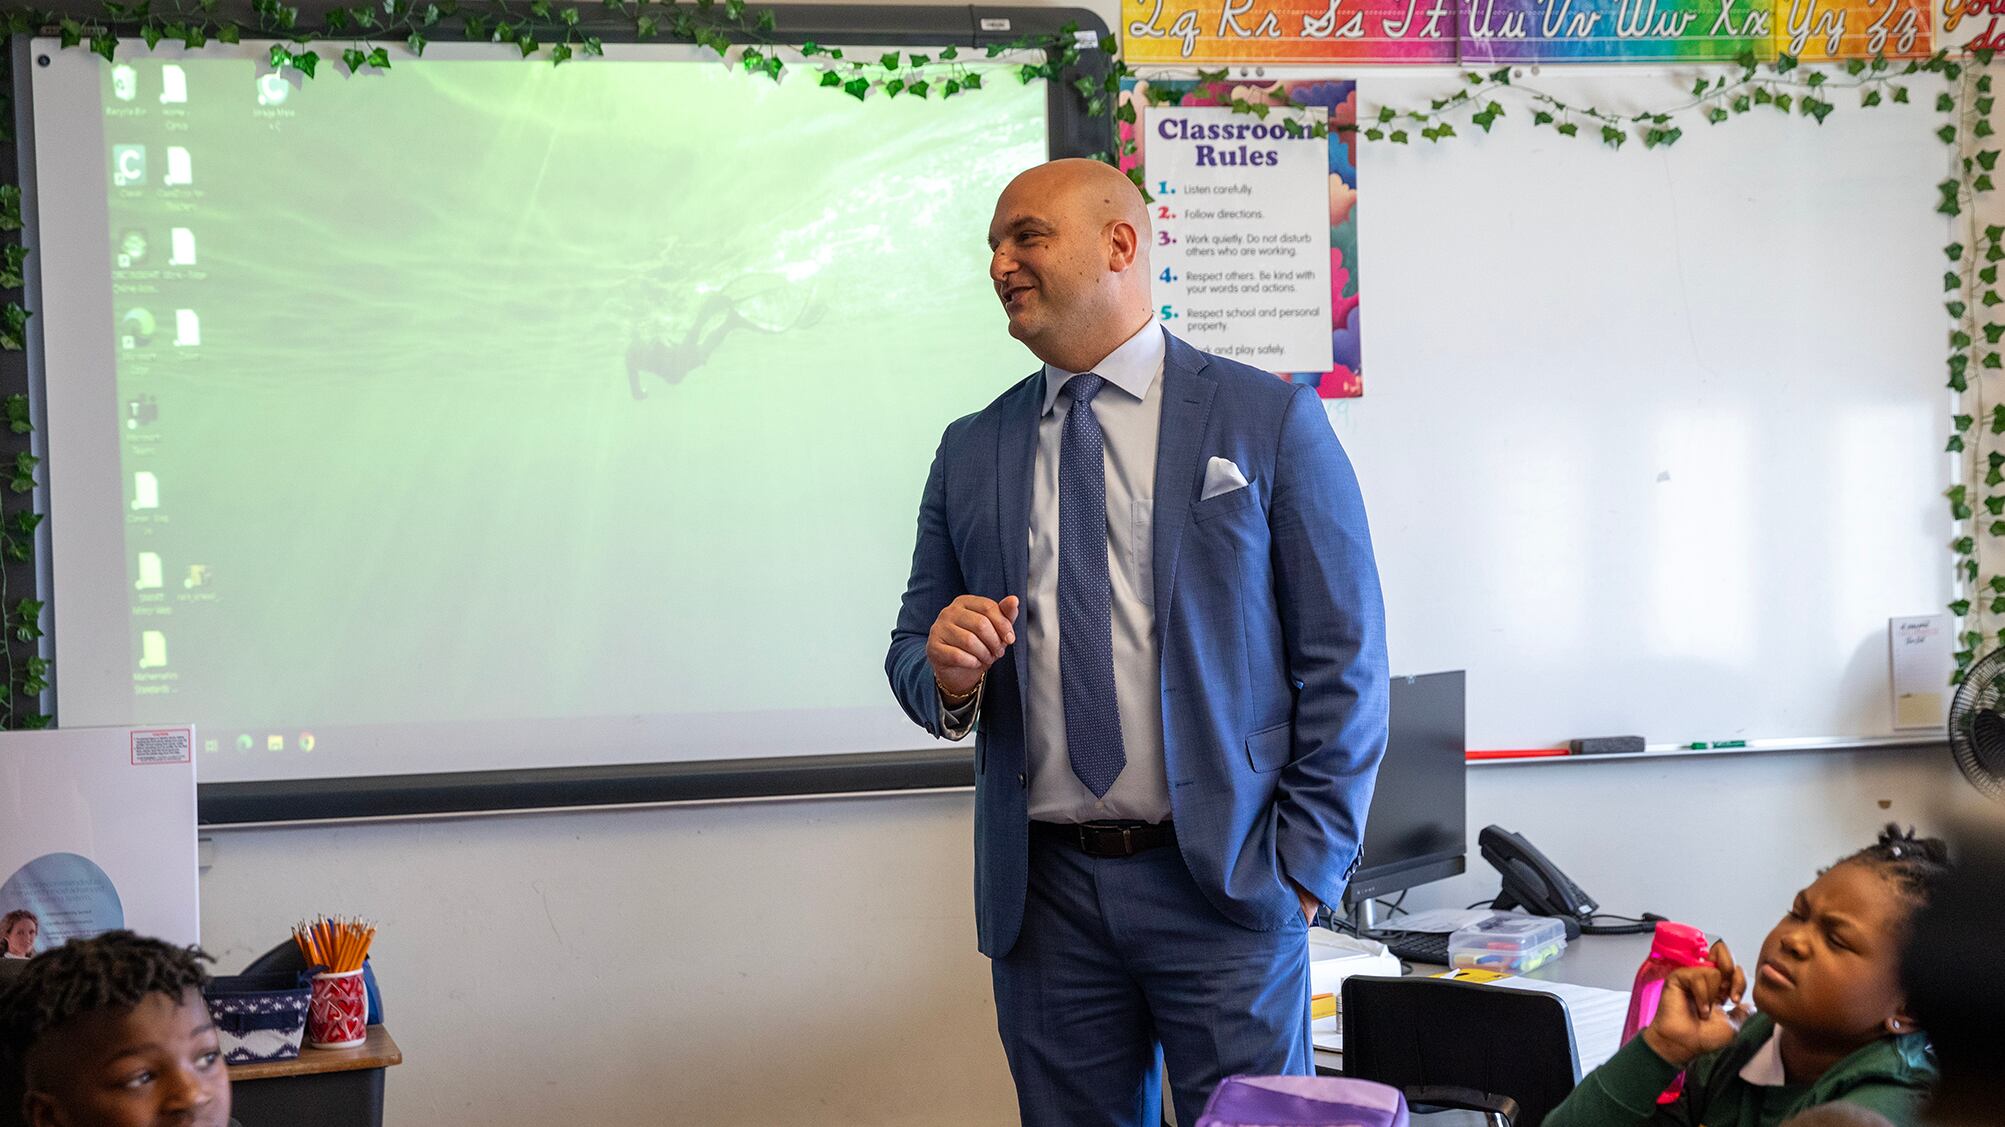 Man wearing a blue suit and tie at the front of a school classroom.